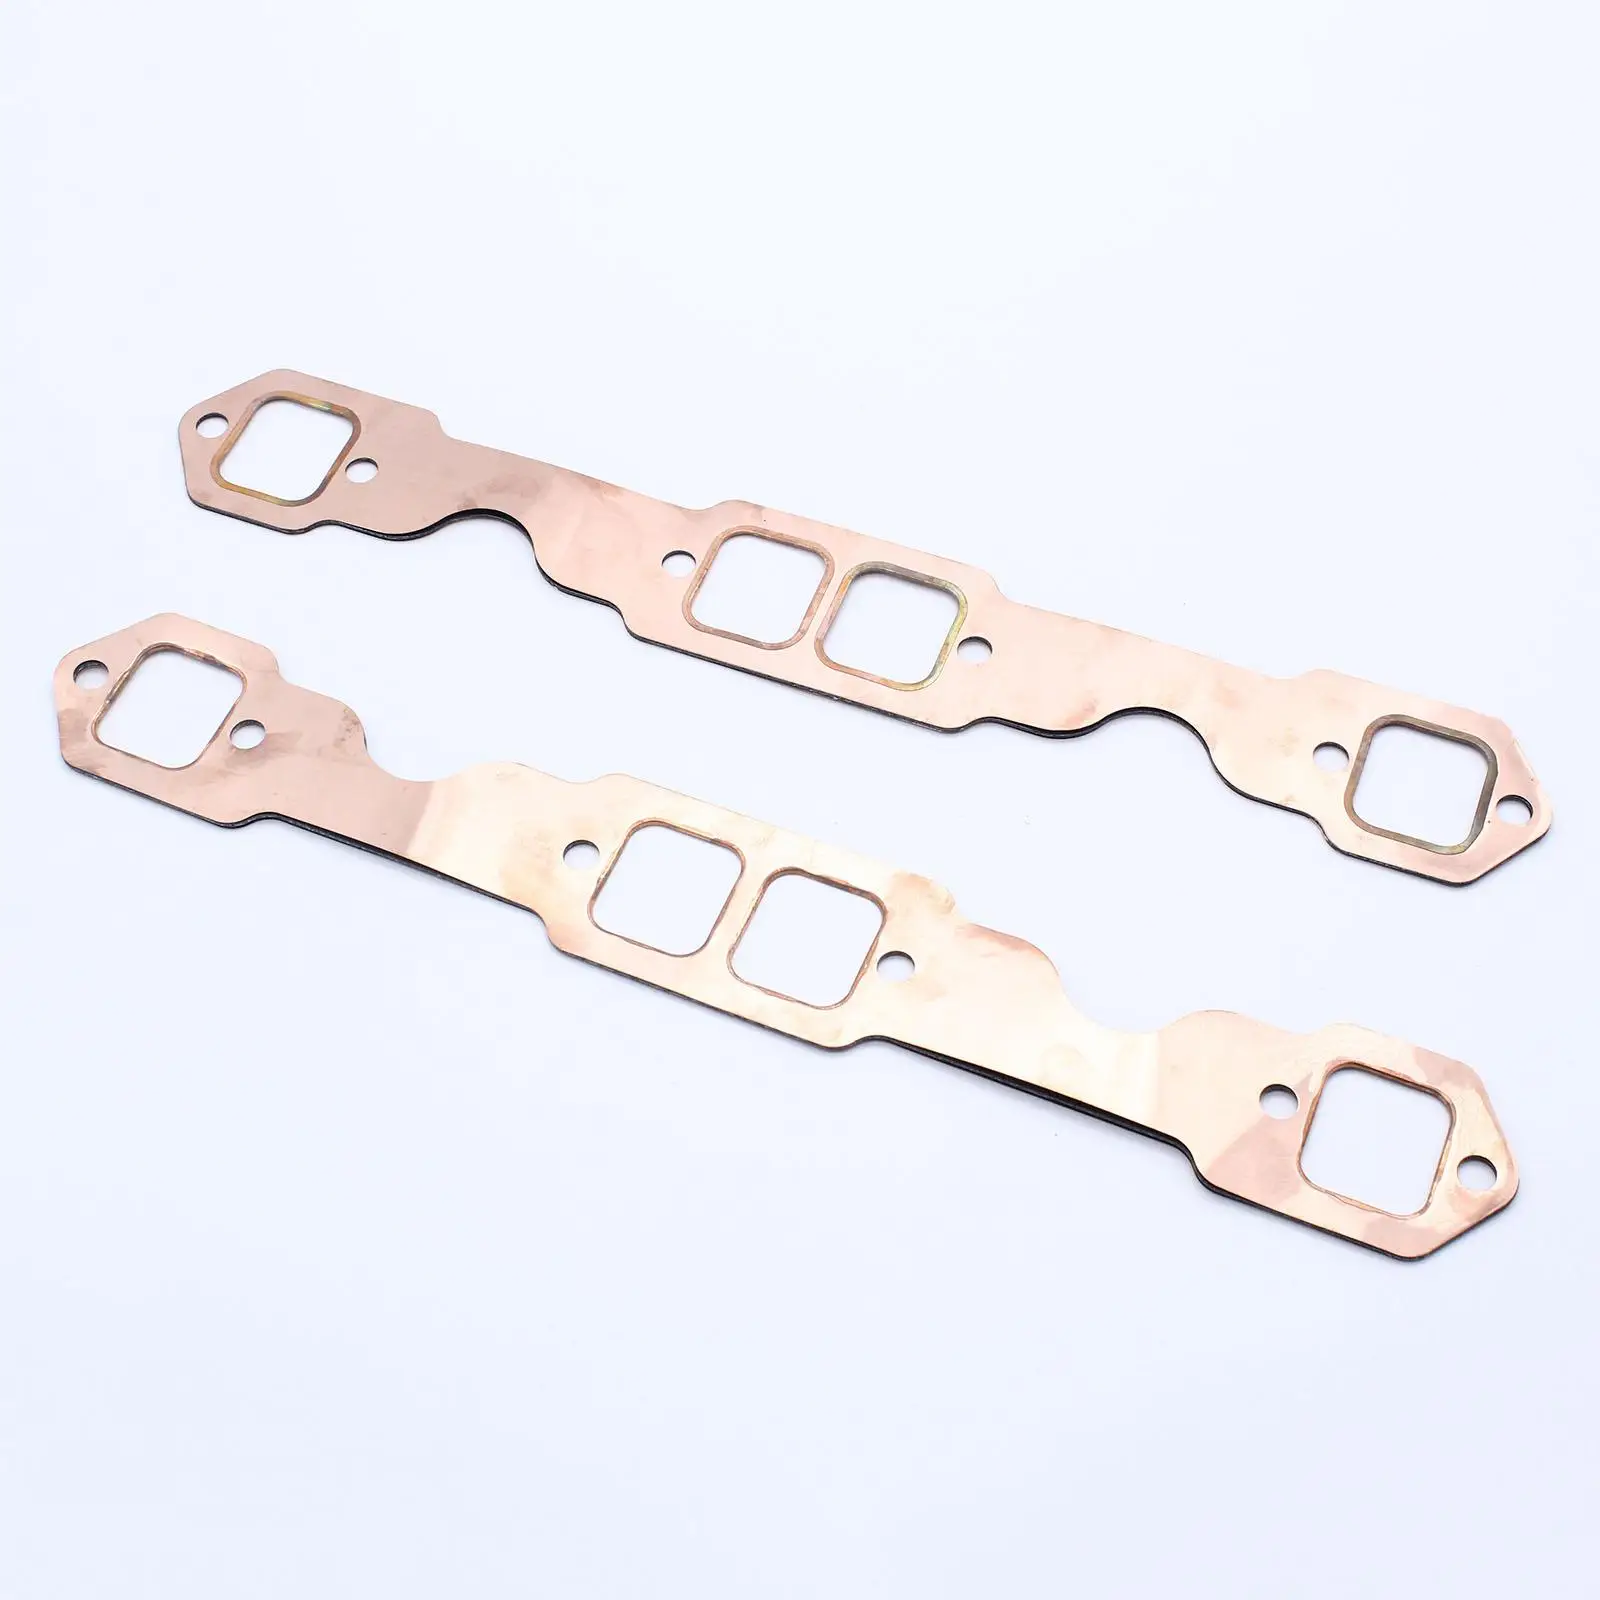 2x C Exhaust Gasket Seal for   327 305 350 383 Exhaust  Gasket Set Made of high reliable quality and durable material